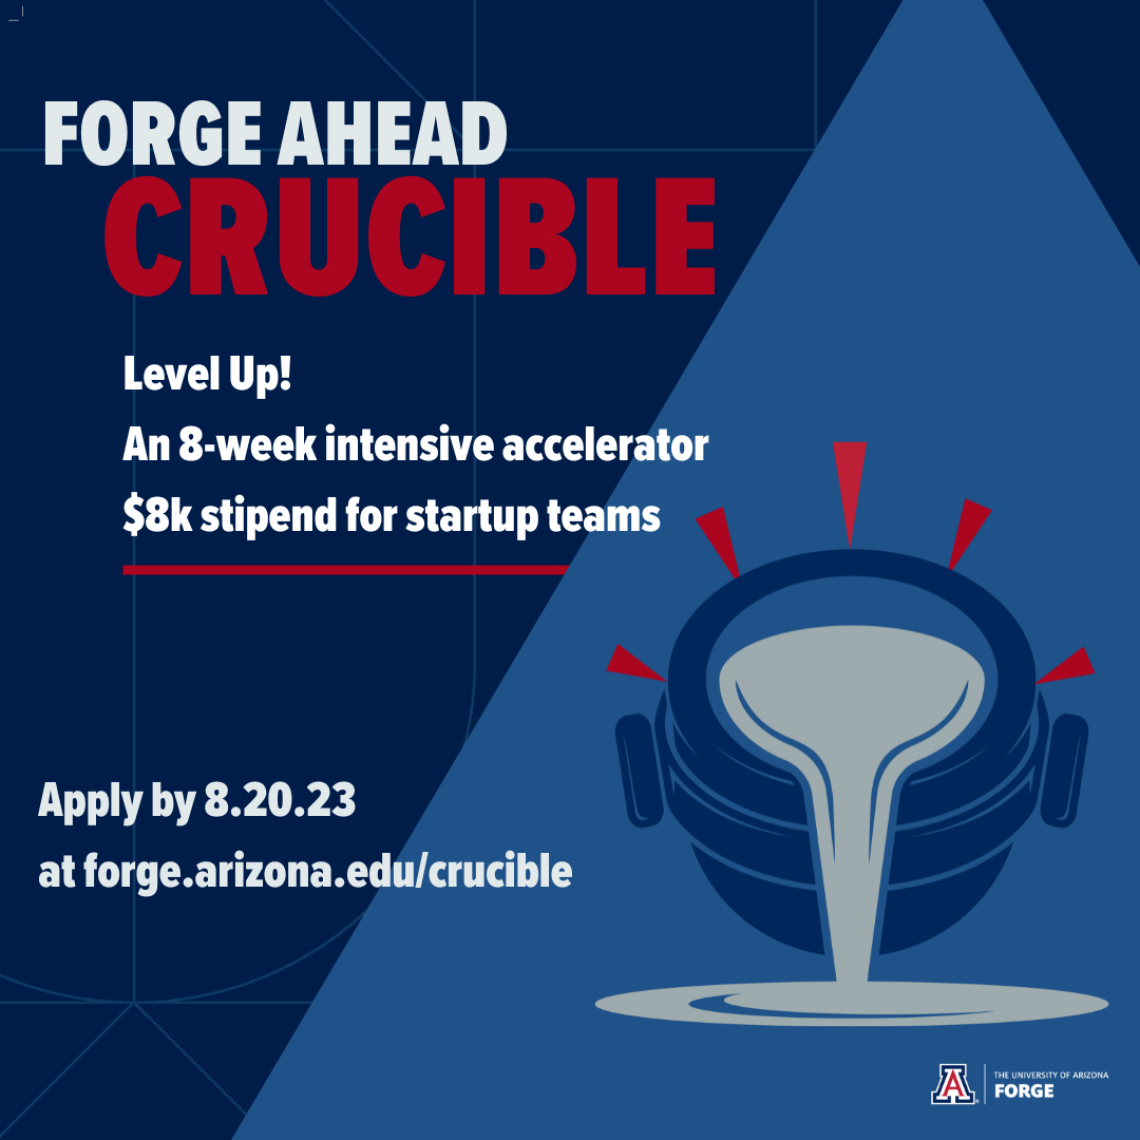 FORGE Ahead Crucible Apply by 8.20.23